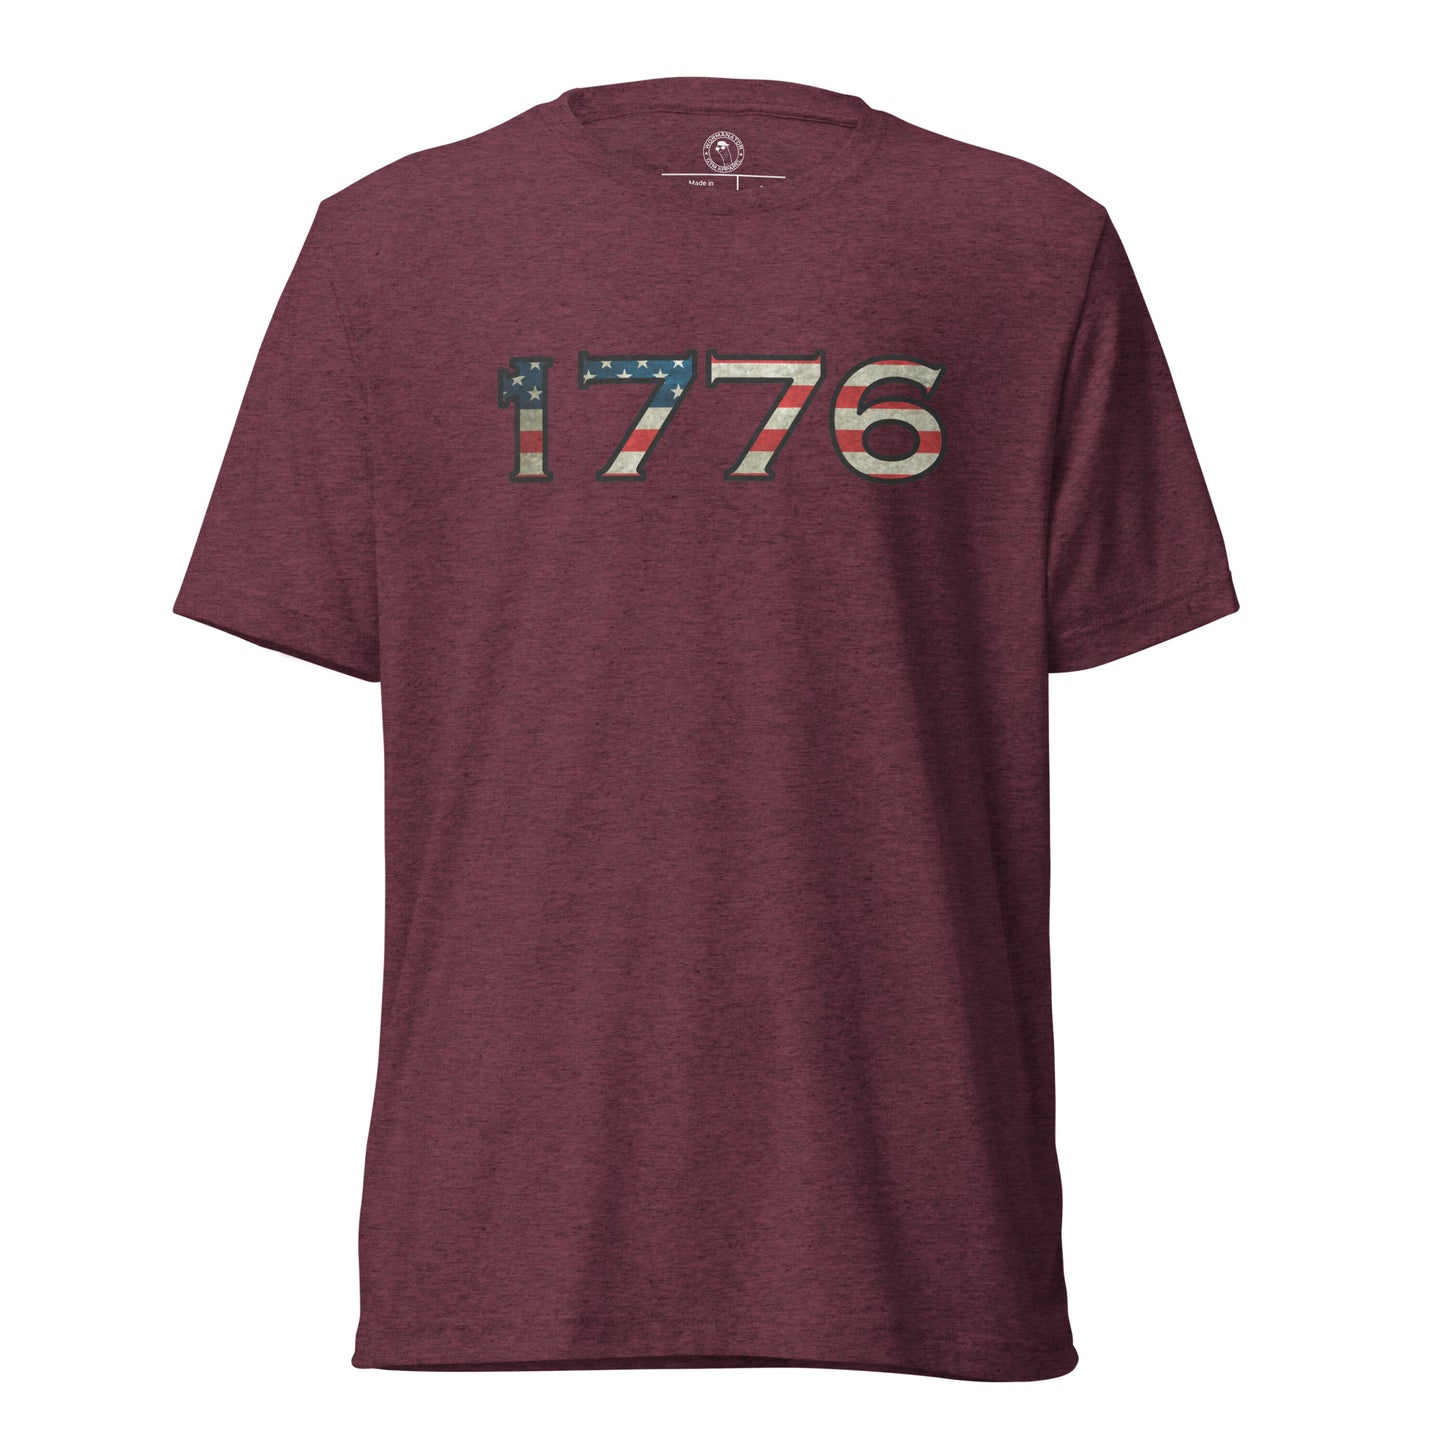 1776 T-Shirt in Maroon Triblend